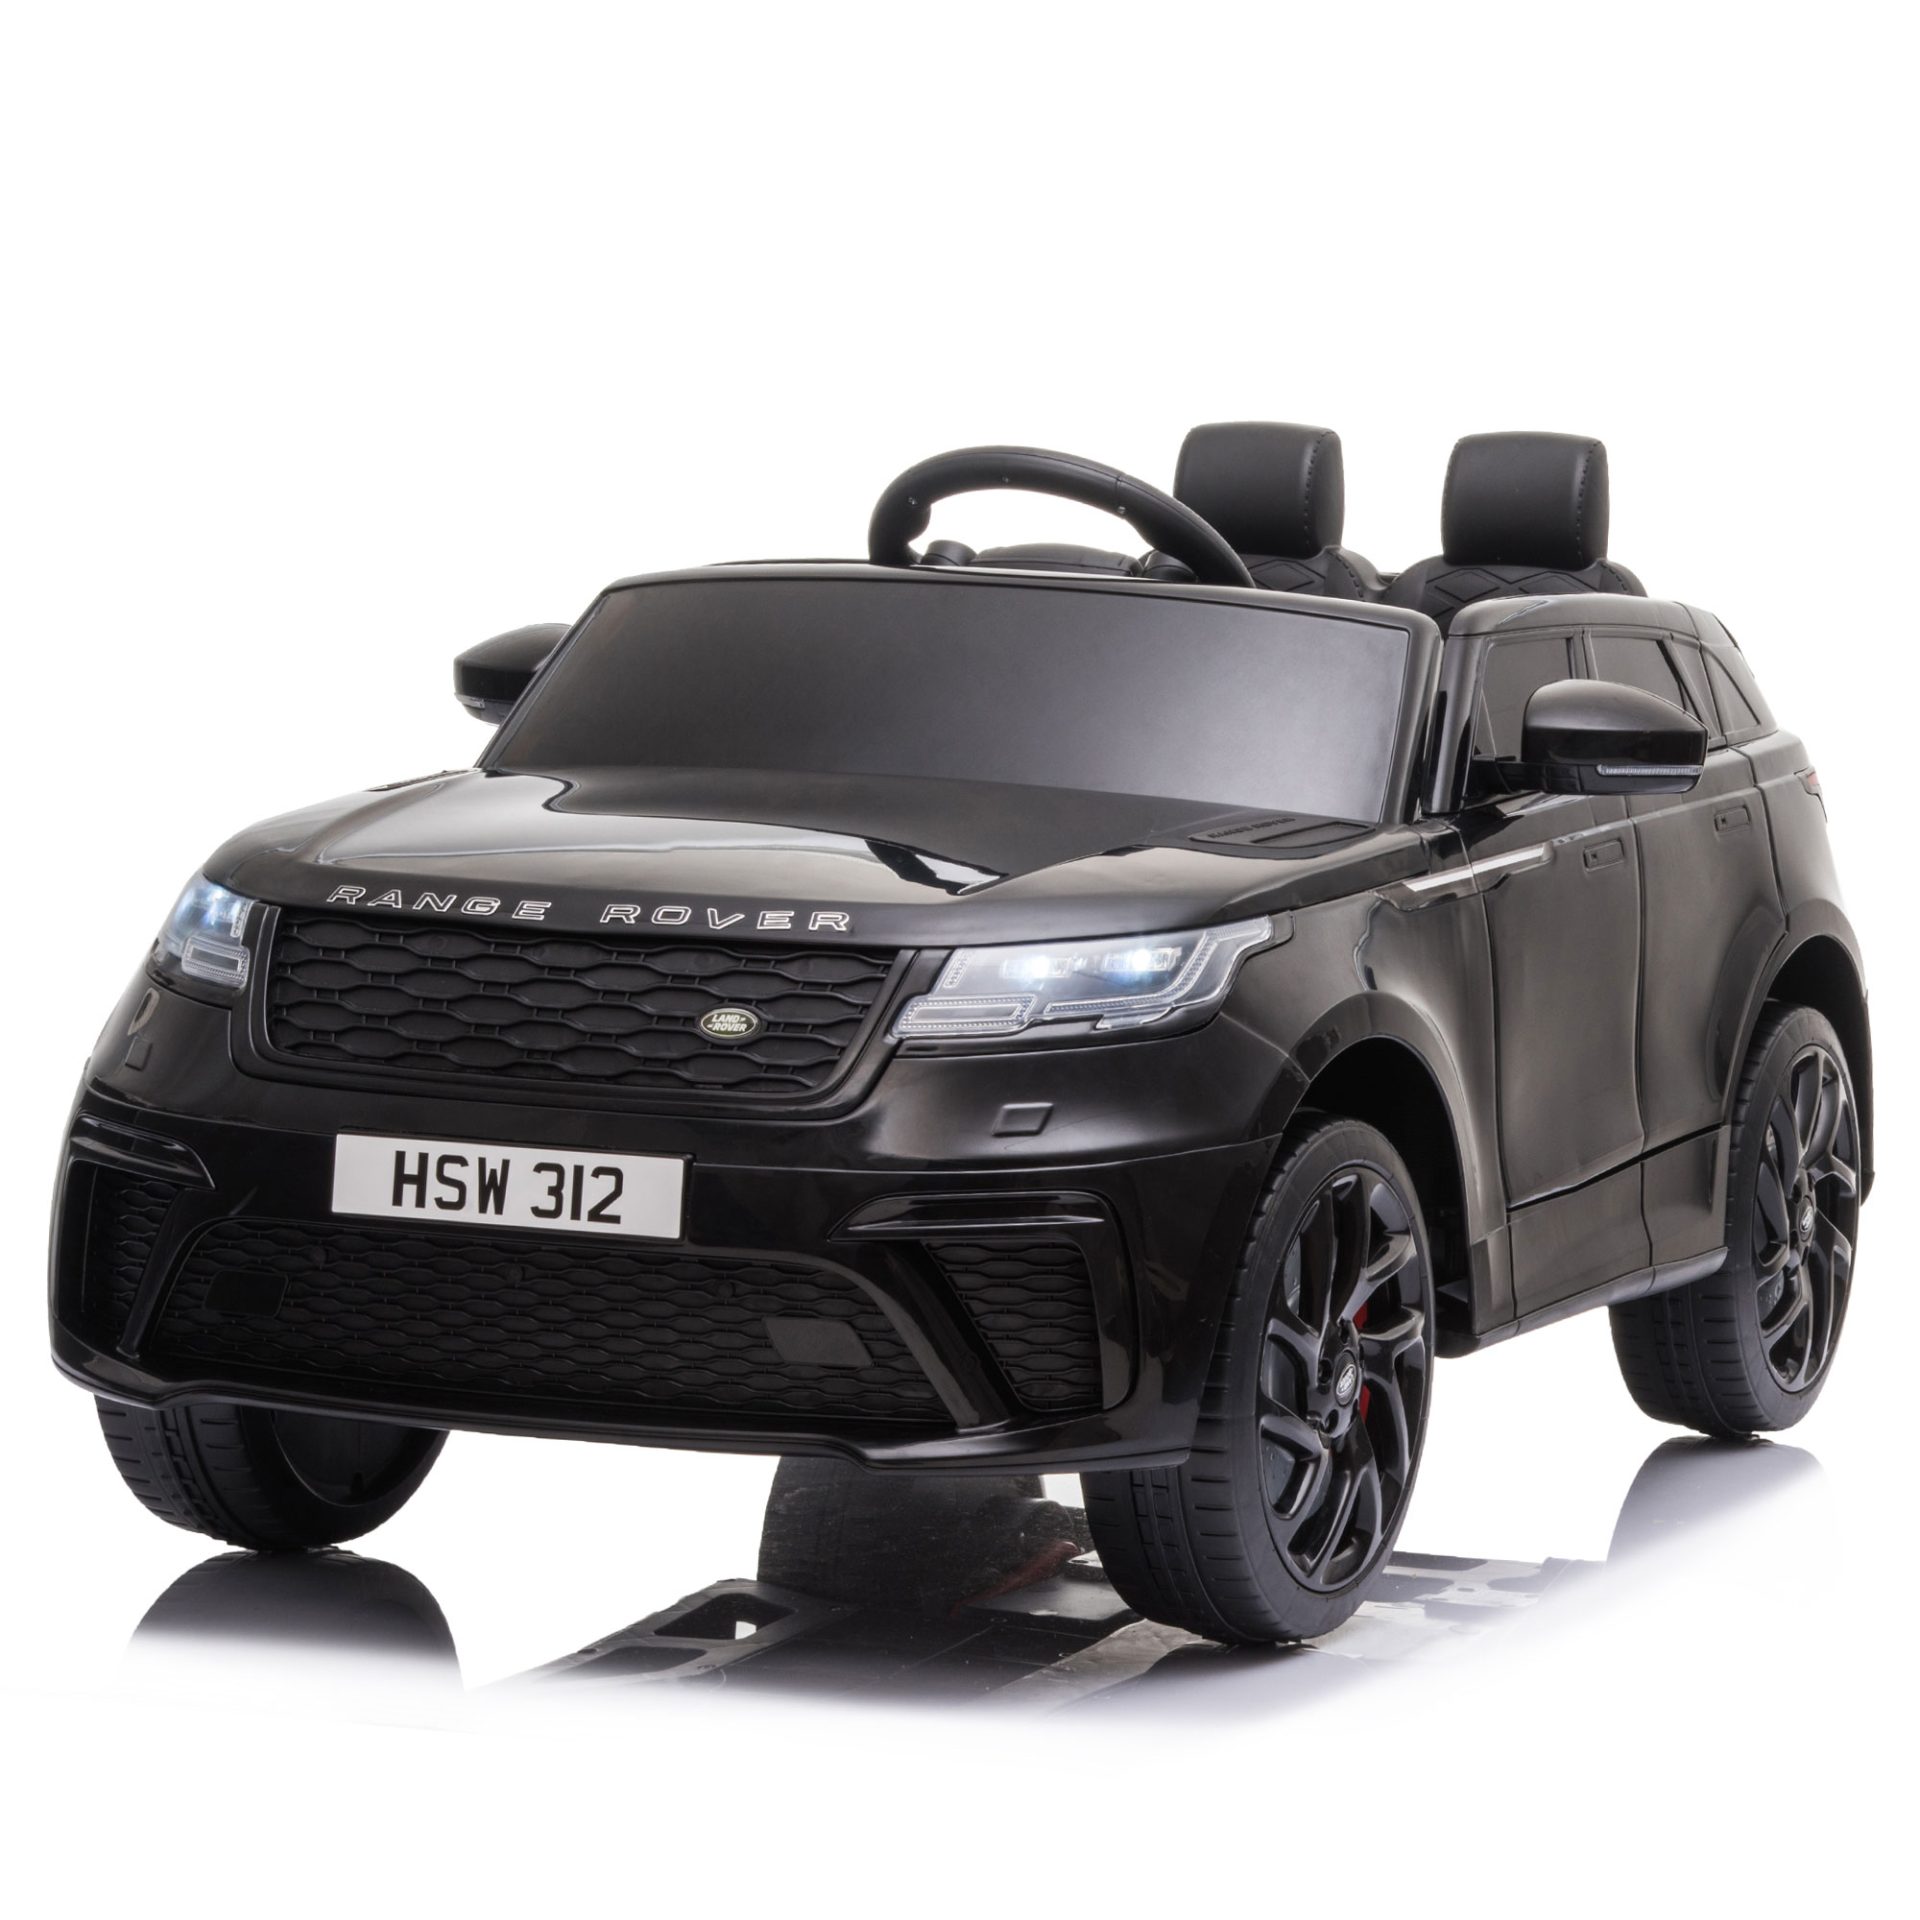 Tobbi 12V Licensed Land Rover Electric Toy Car, Battery Powered Kids Ride On Car with Parental Remote Control, Black TH17R08162 scaled